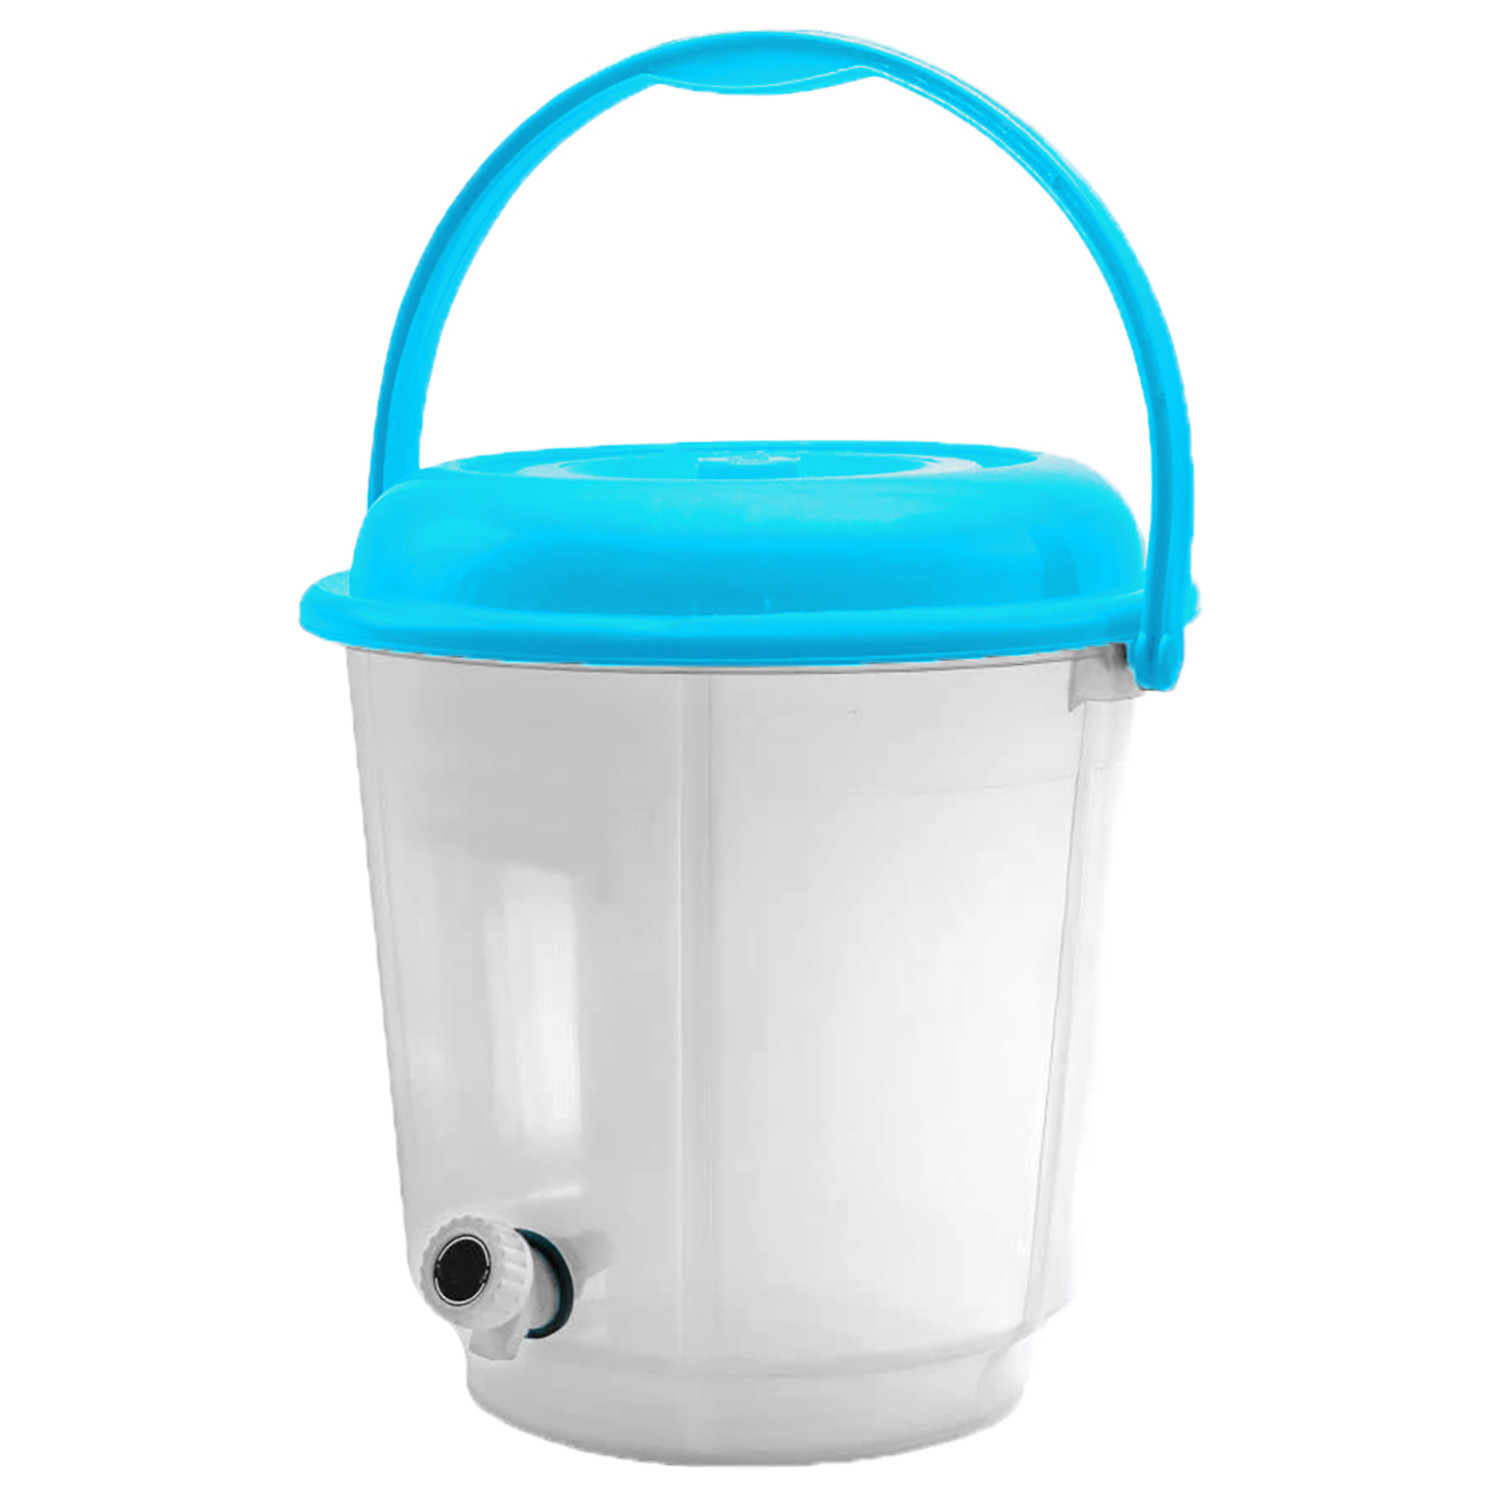 Kuber Industries Multipurposes Plastic Transparent Bucket With Lid & Tap System For Home Cleaning & Save Water, 18Ltr. (Blue)